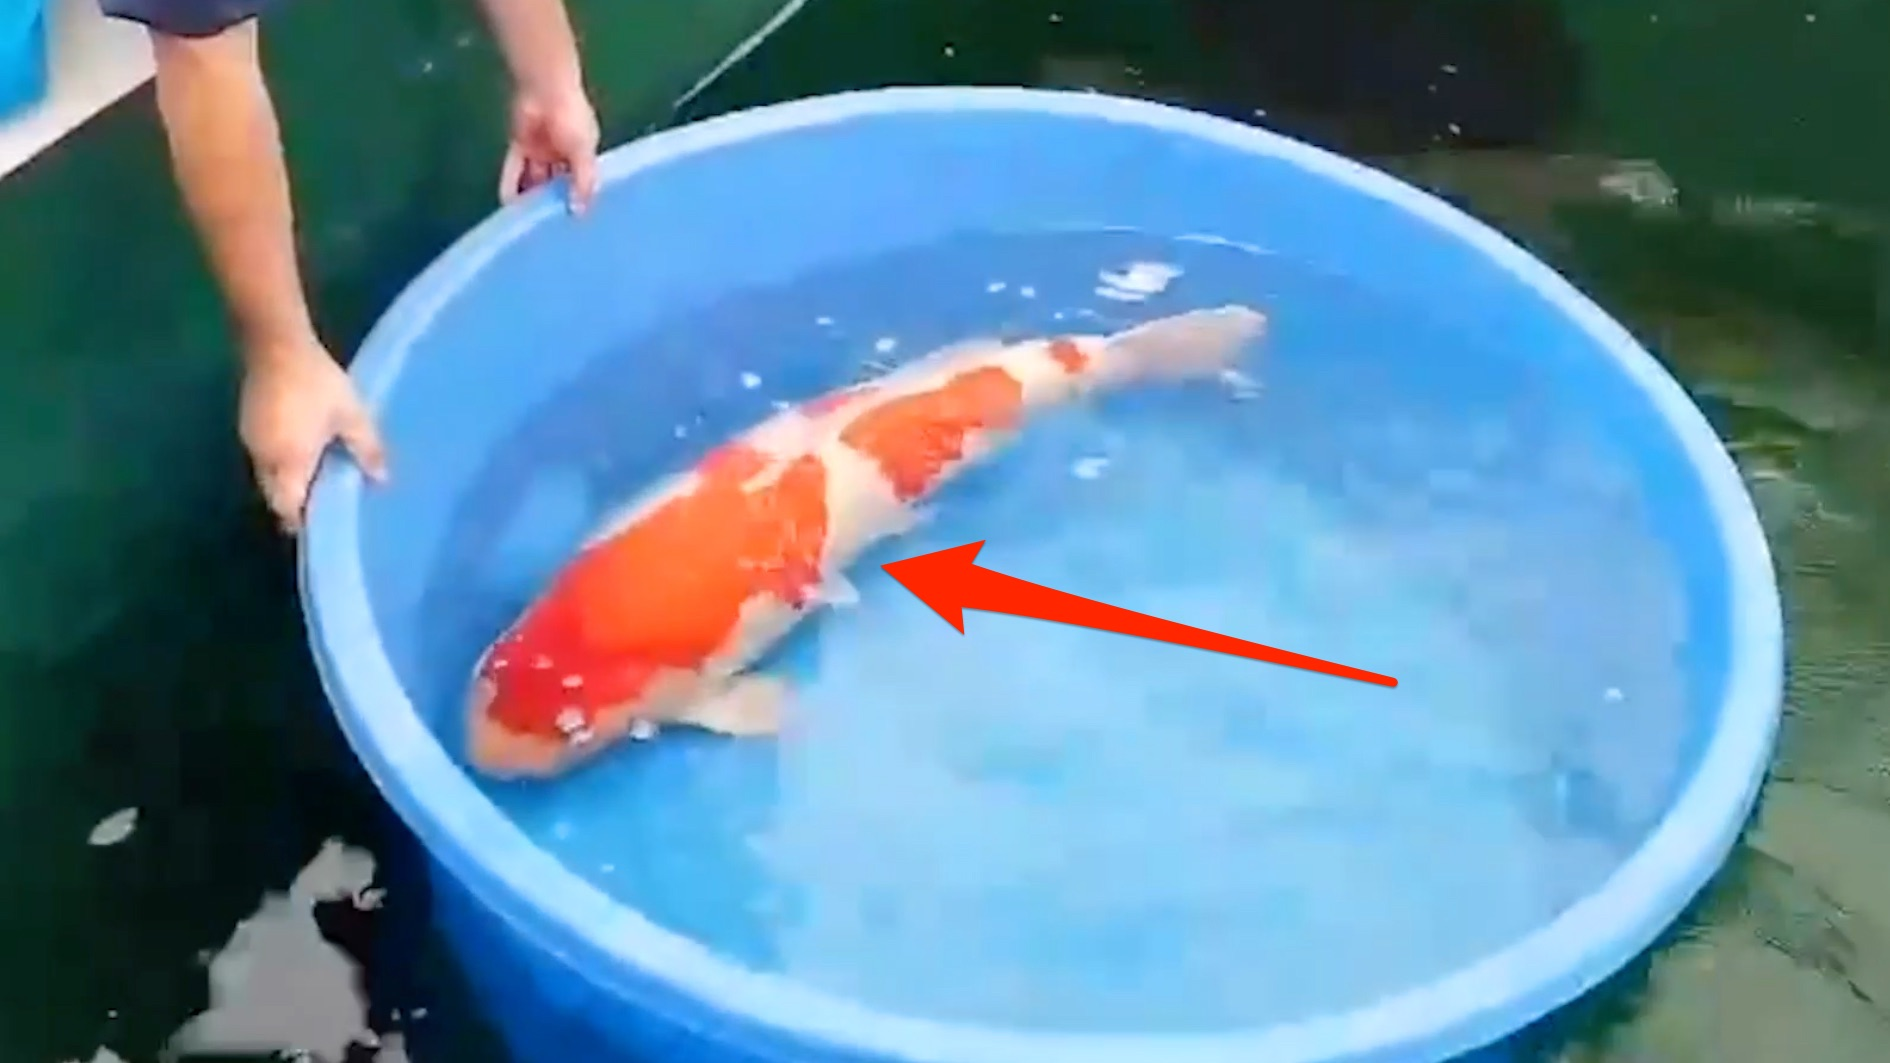 This fish sold for $1.8 million — here's why some koi fish are so expensive